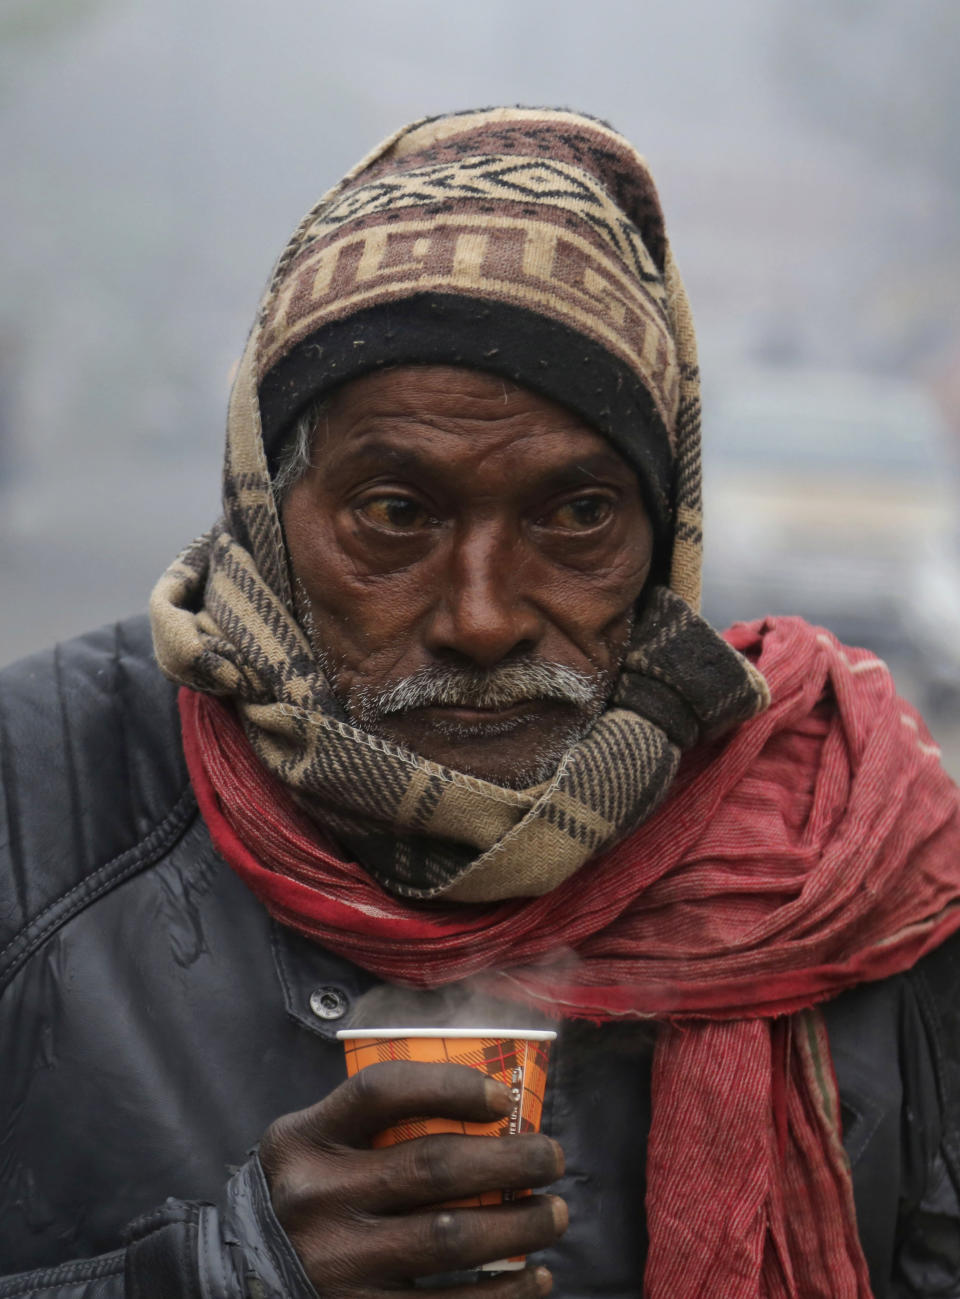 A man holds a hot cup of tea on a cold and foggy morning in Jammu, India, Tuesday, Dec. 31, 2019. Opaque, chilly smog has blanketed northern India as just-about-freezing temperatures collided with hazardous levels of air pollution. The cold and fog are expected to continue through New Year's Day. (AP Photo/Channi Anand)